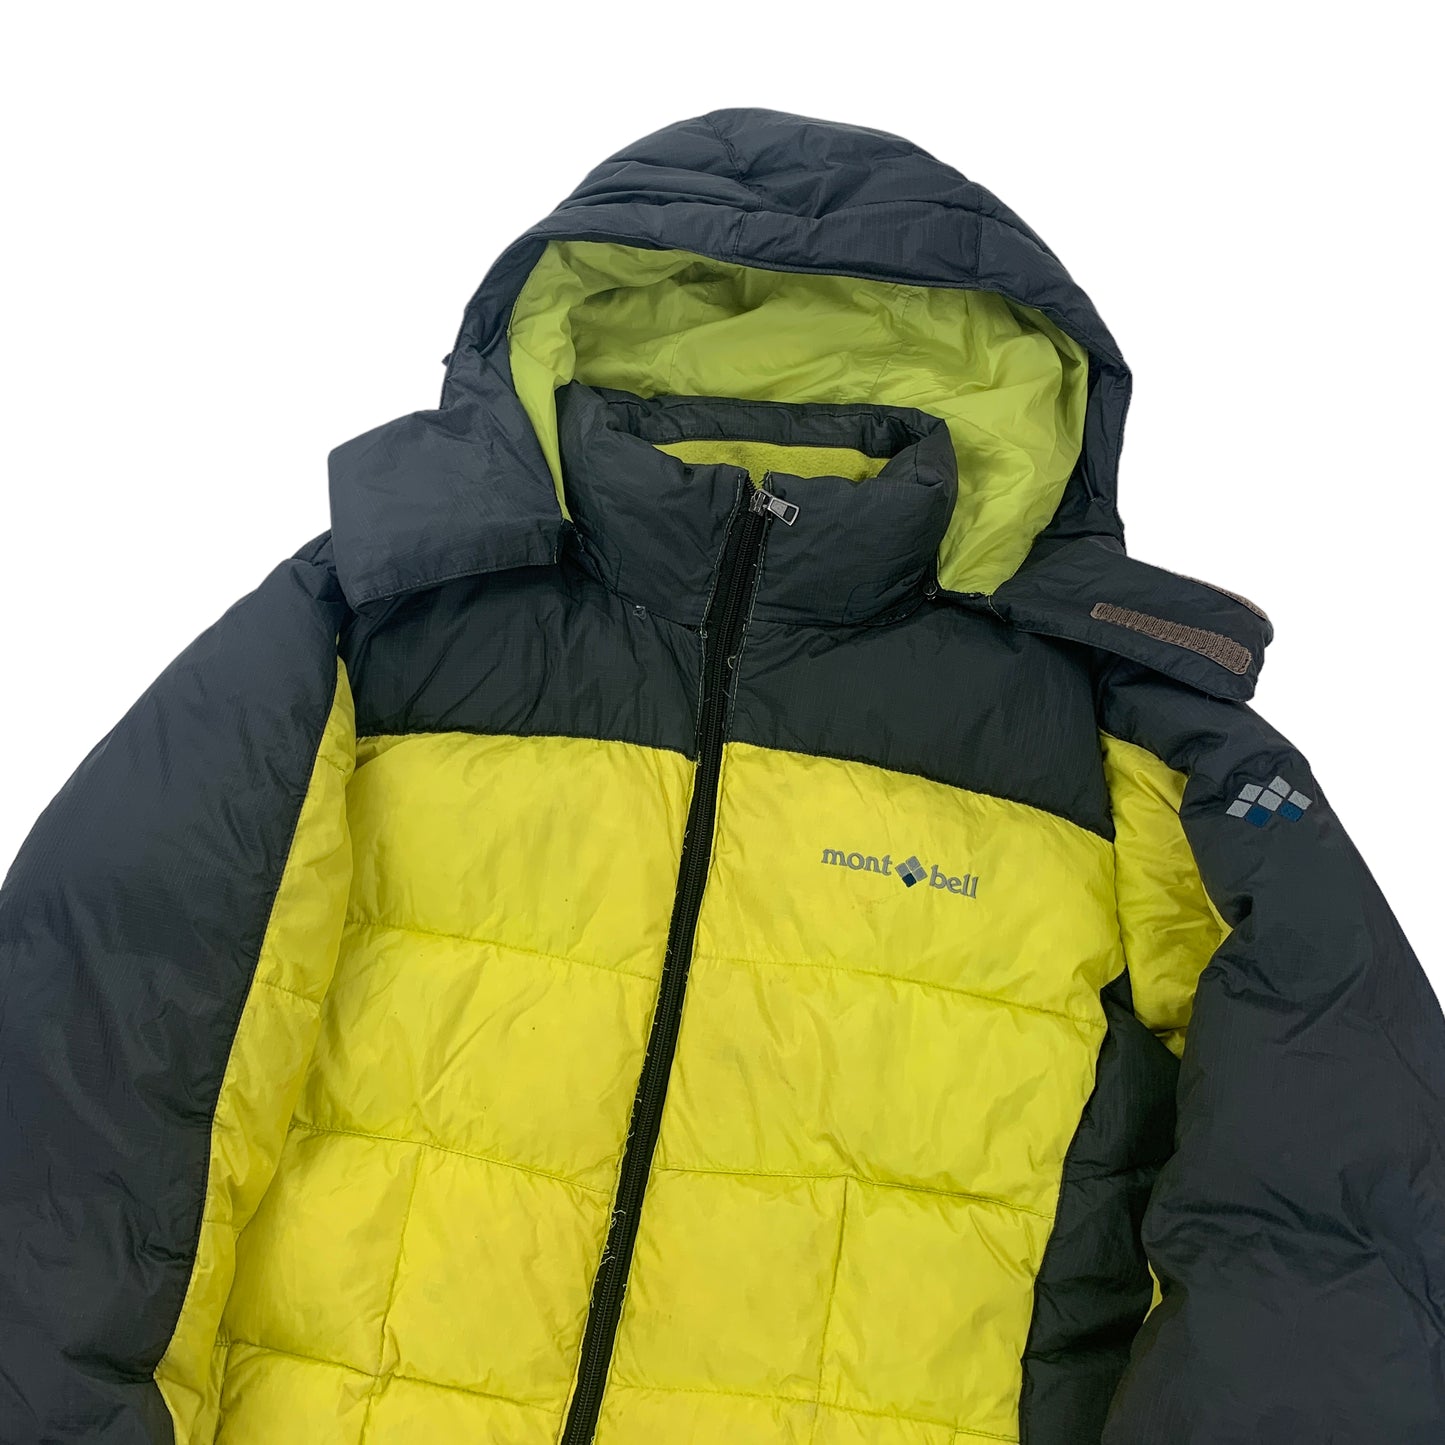 Montbell Puffer Jacket - L